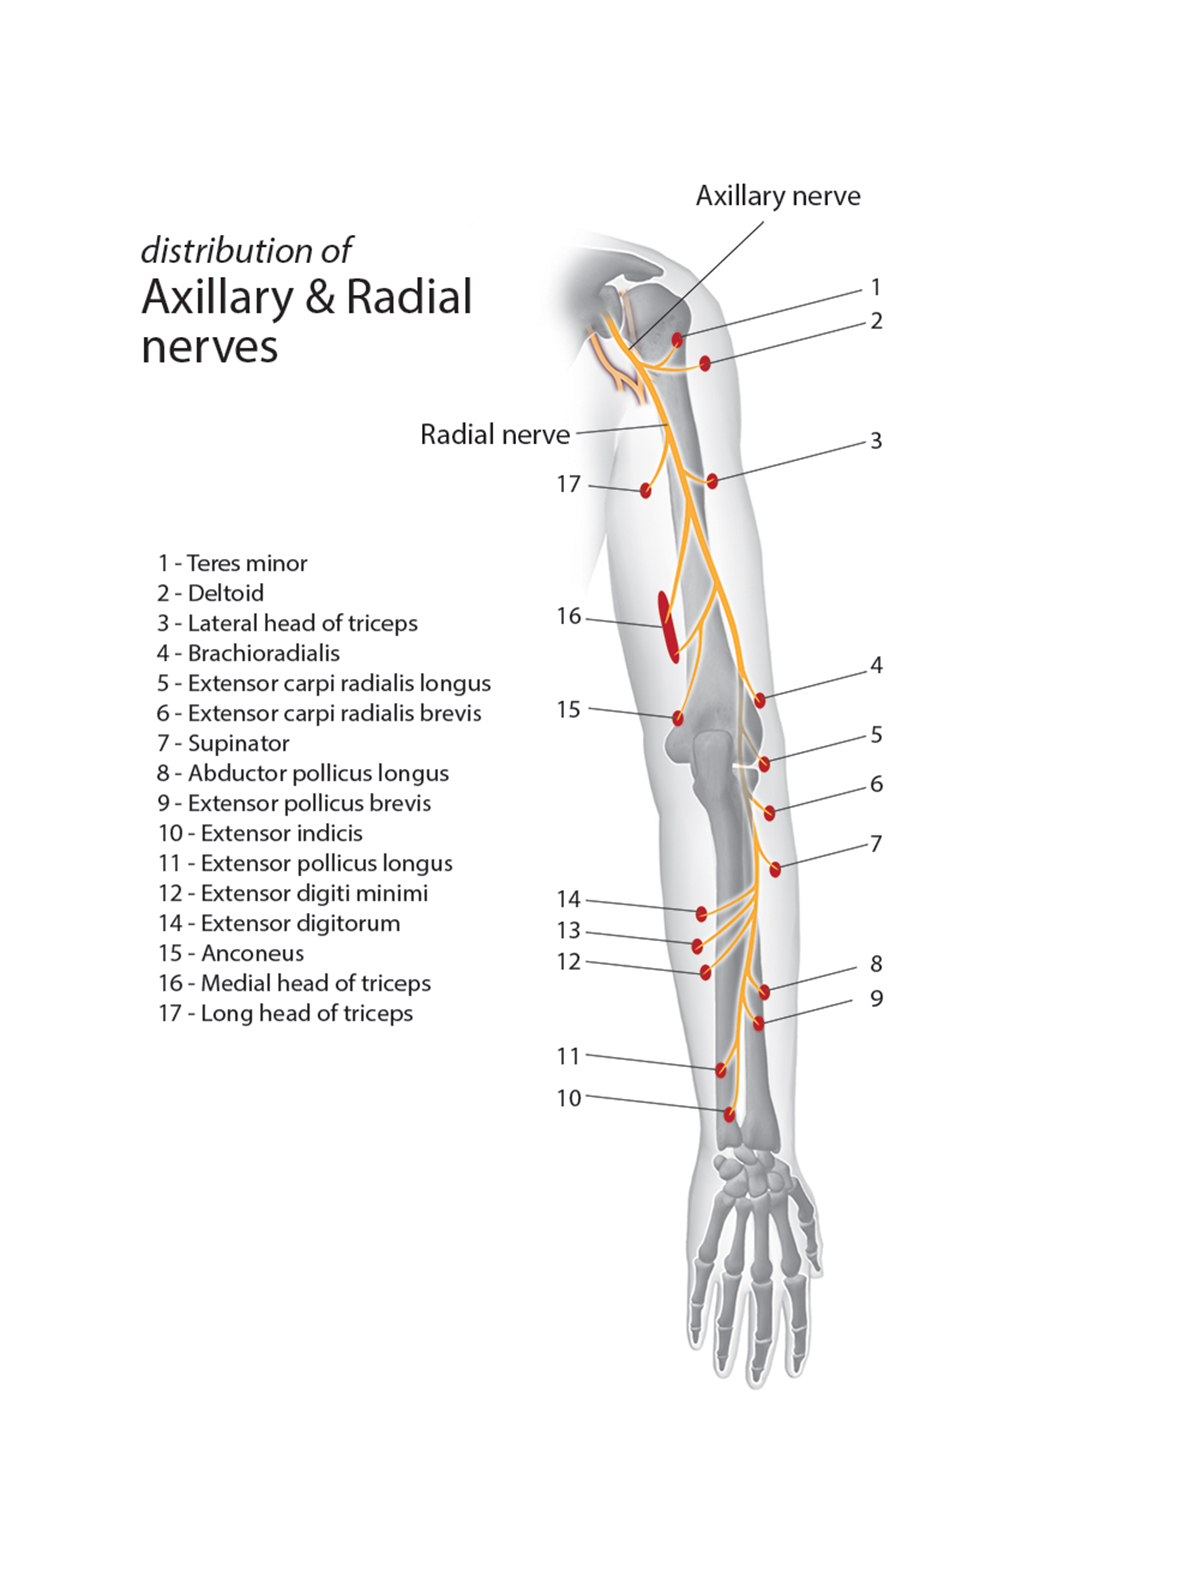 Diagram showing the muscles innervated by the radial and axillary nerves.